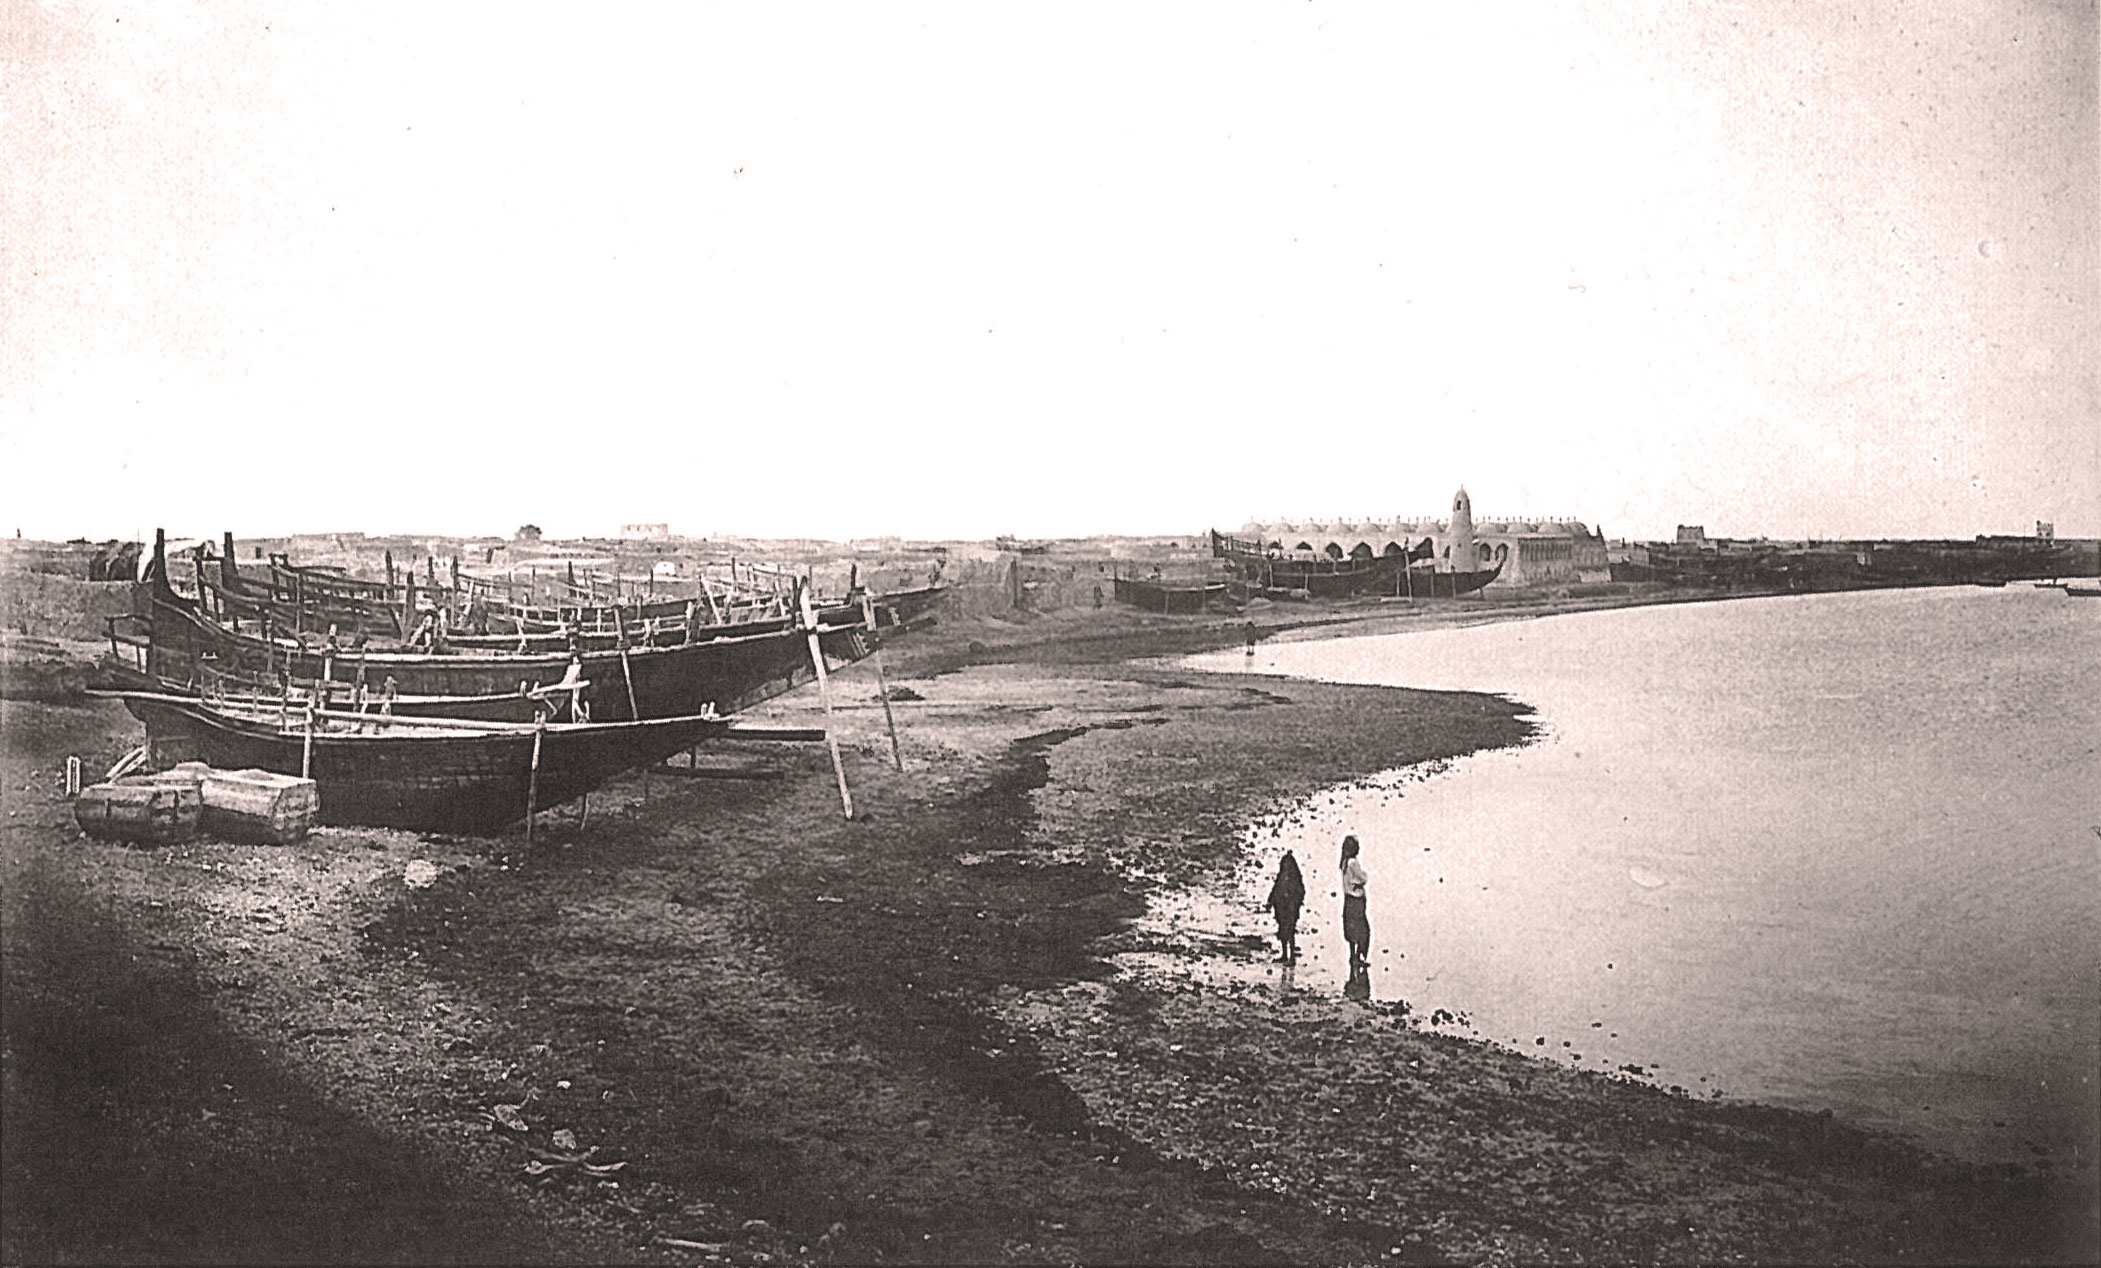 Doha Bay in 1904 with a fleet of dhows in the waning years of the pearl industry.